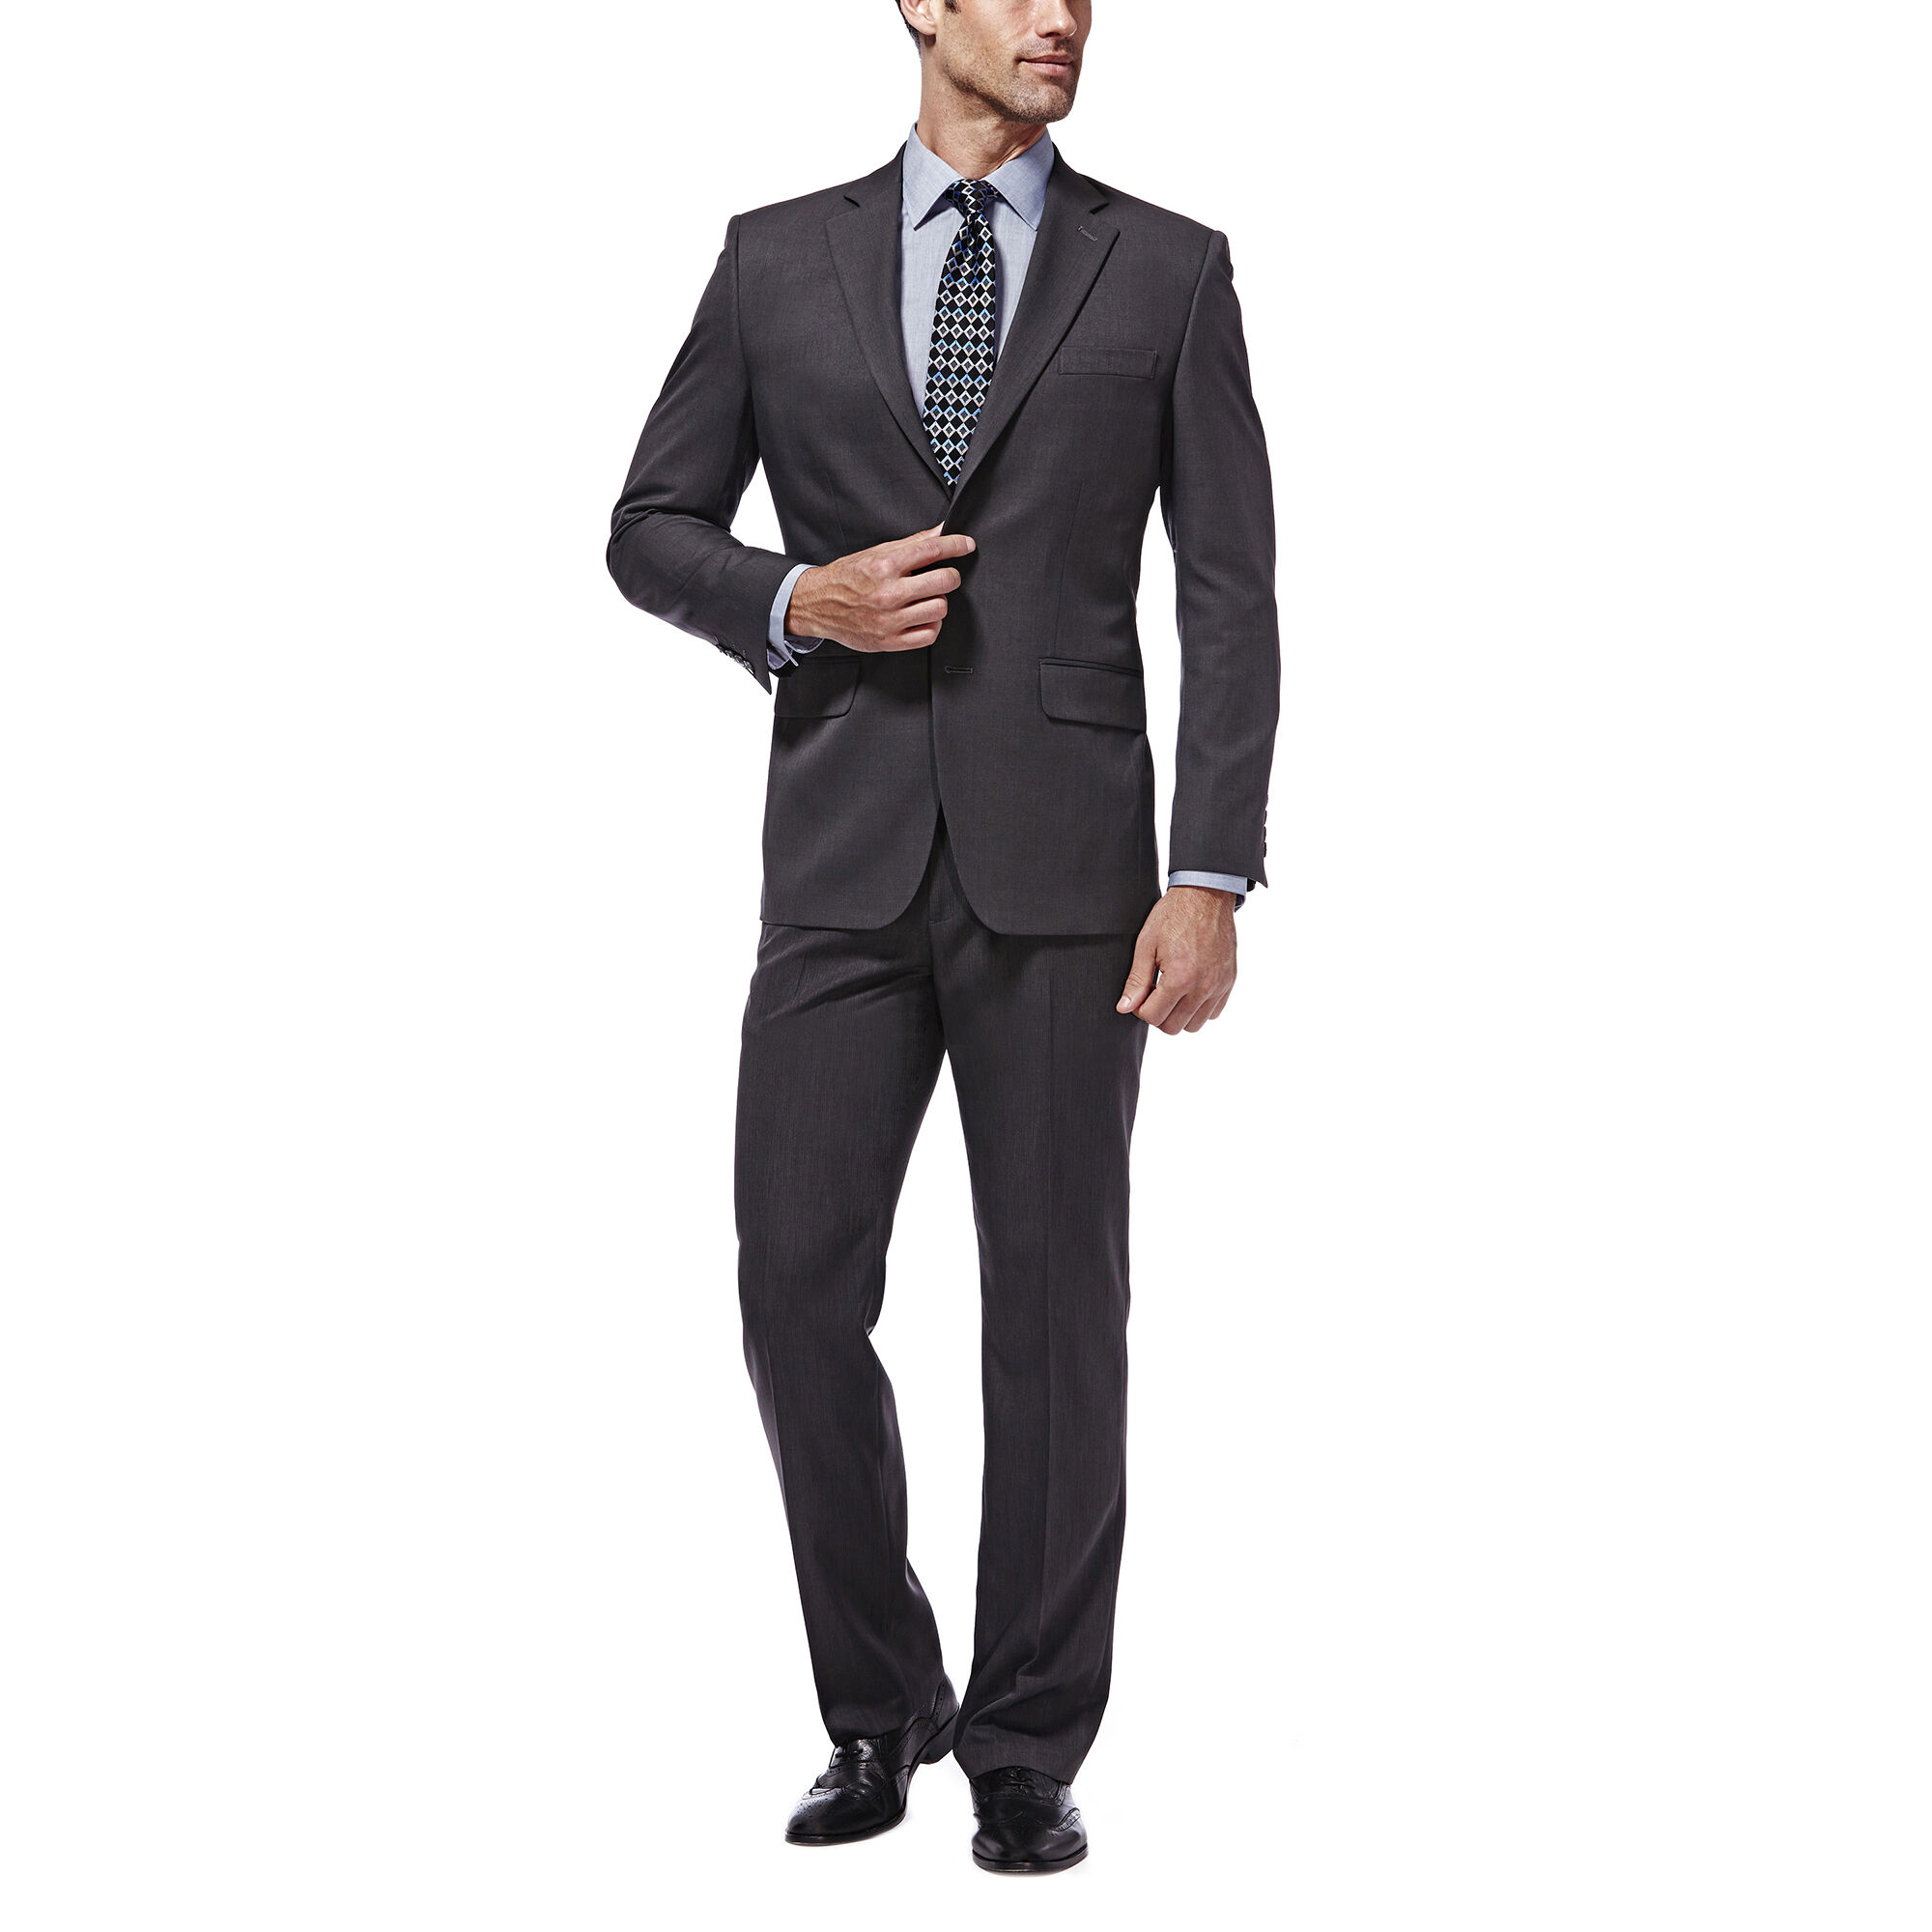 Haggar Travel Performance Suit Separates Jacket Black / Charcoal (HZ70275 Clothing Suits) photo